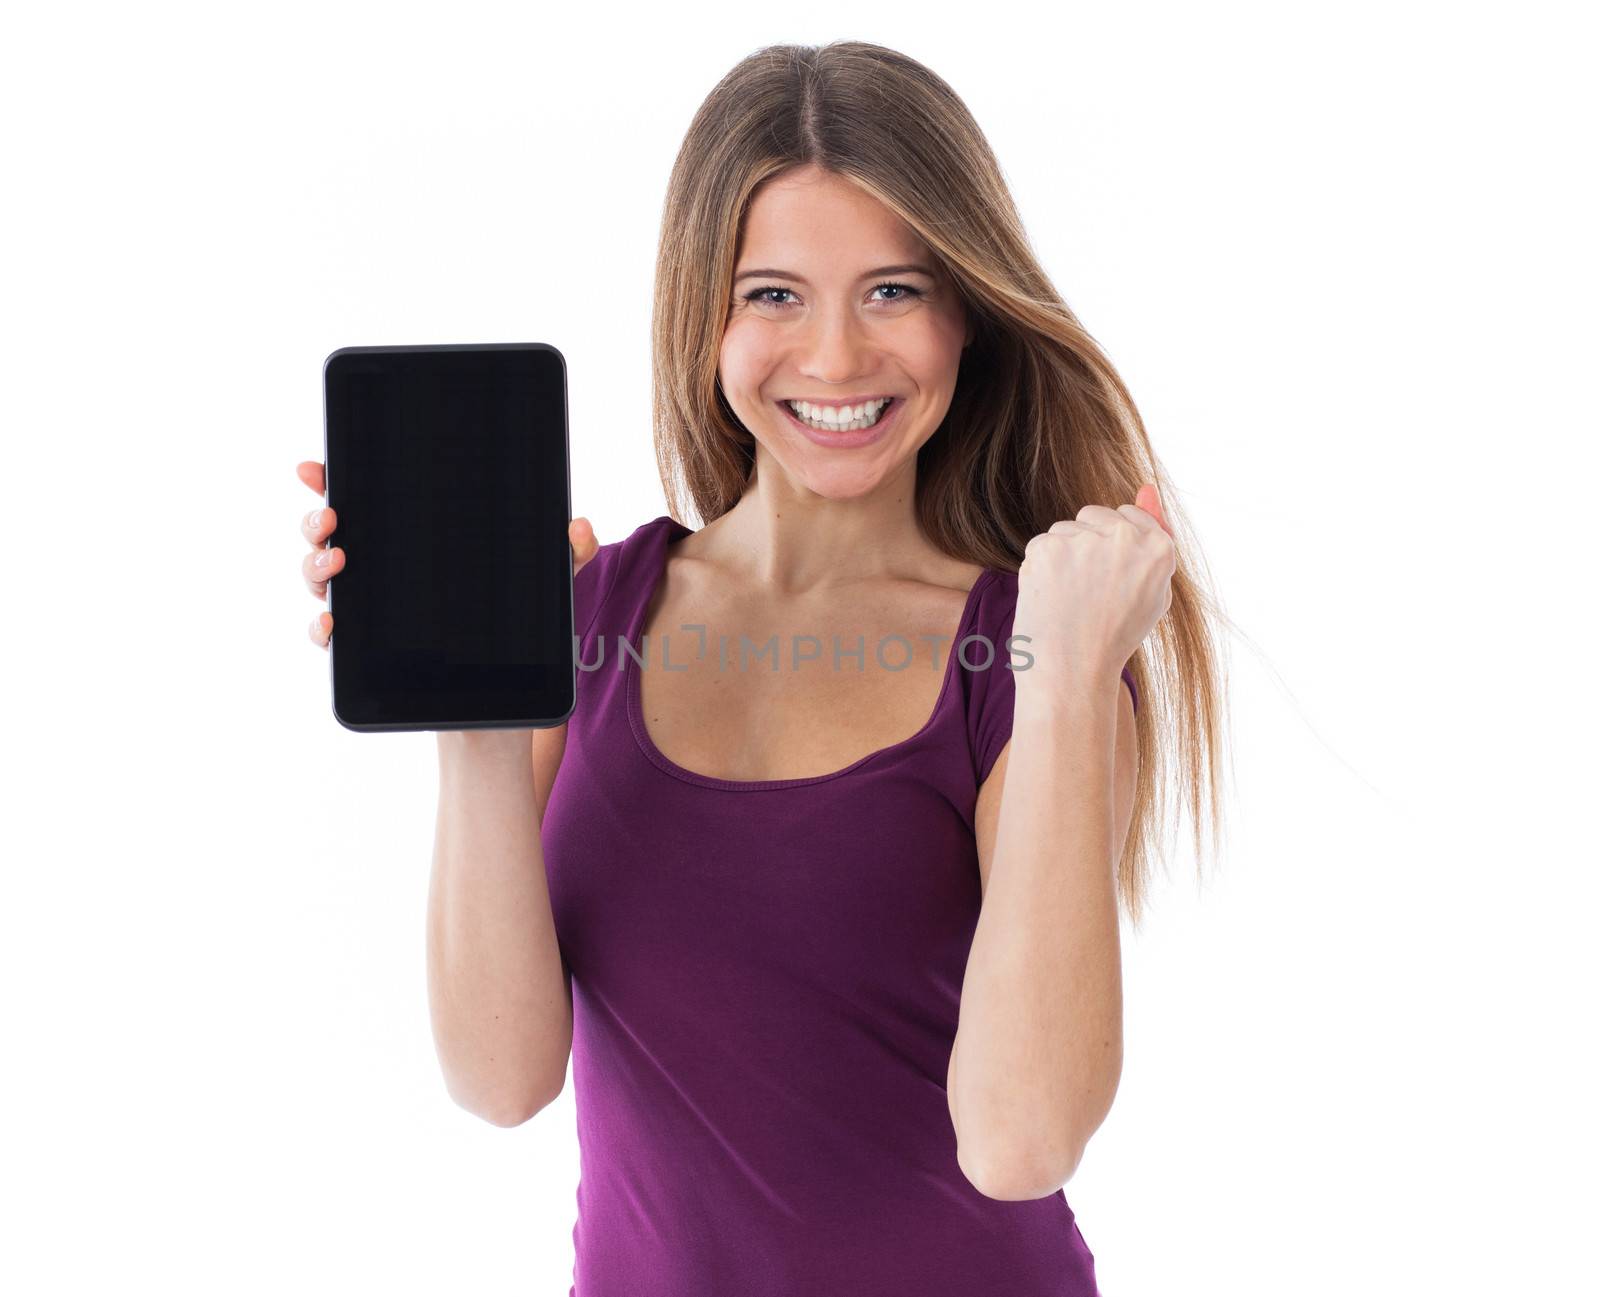 Very happy woman showing a blank electronic tablet, communication concept